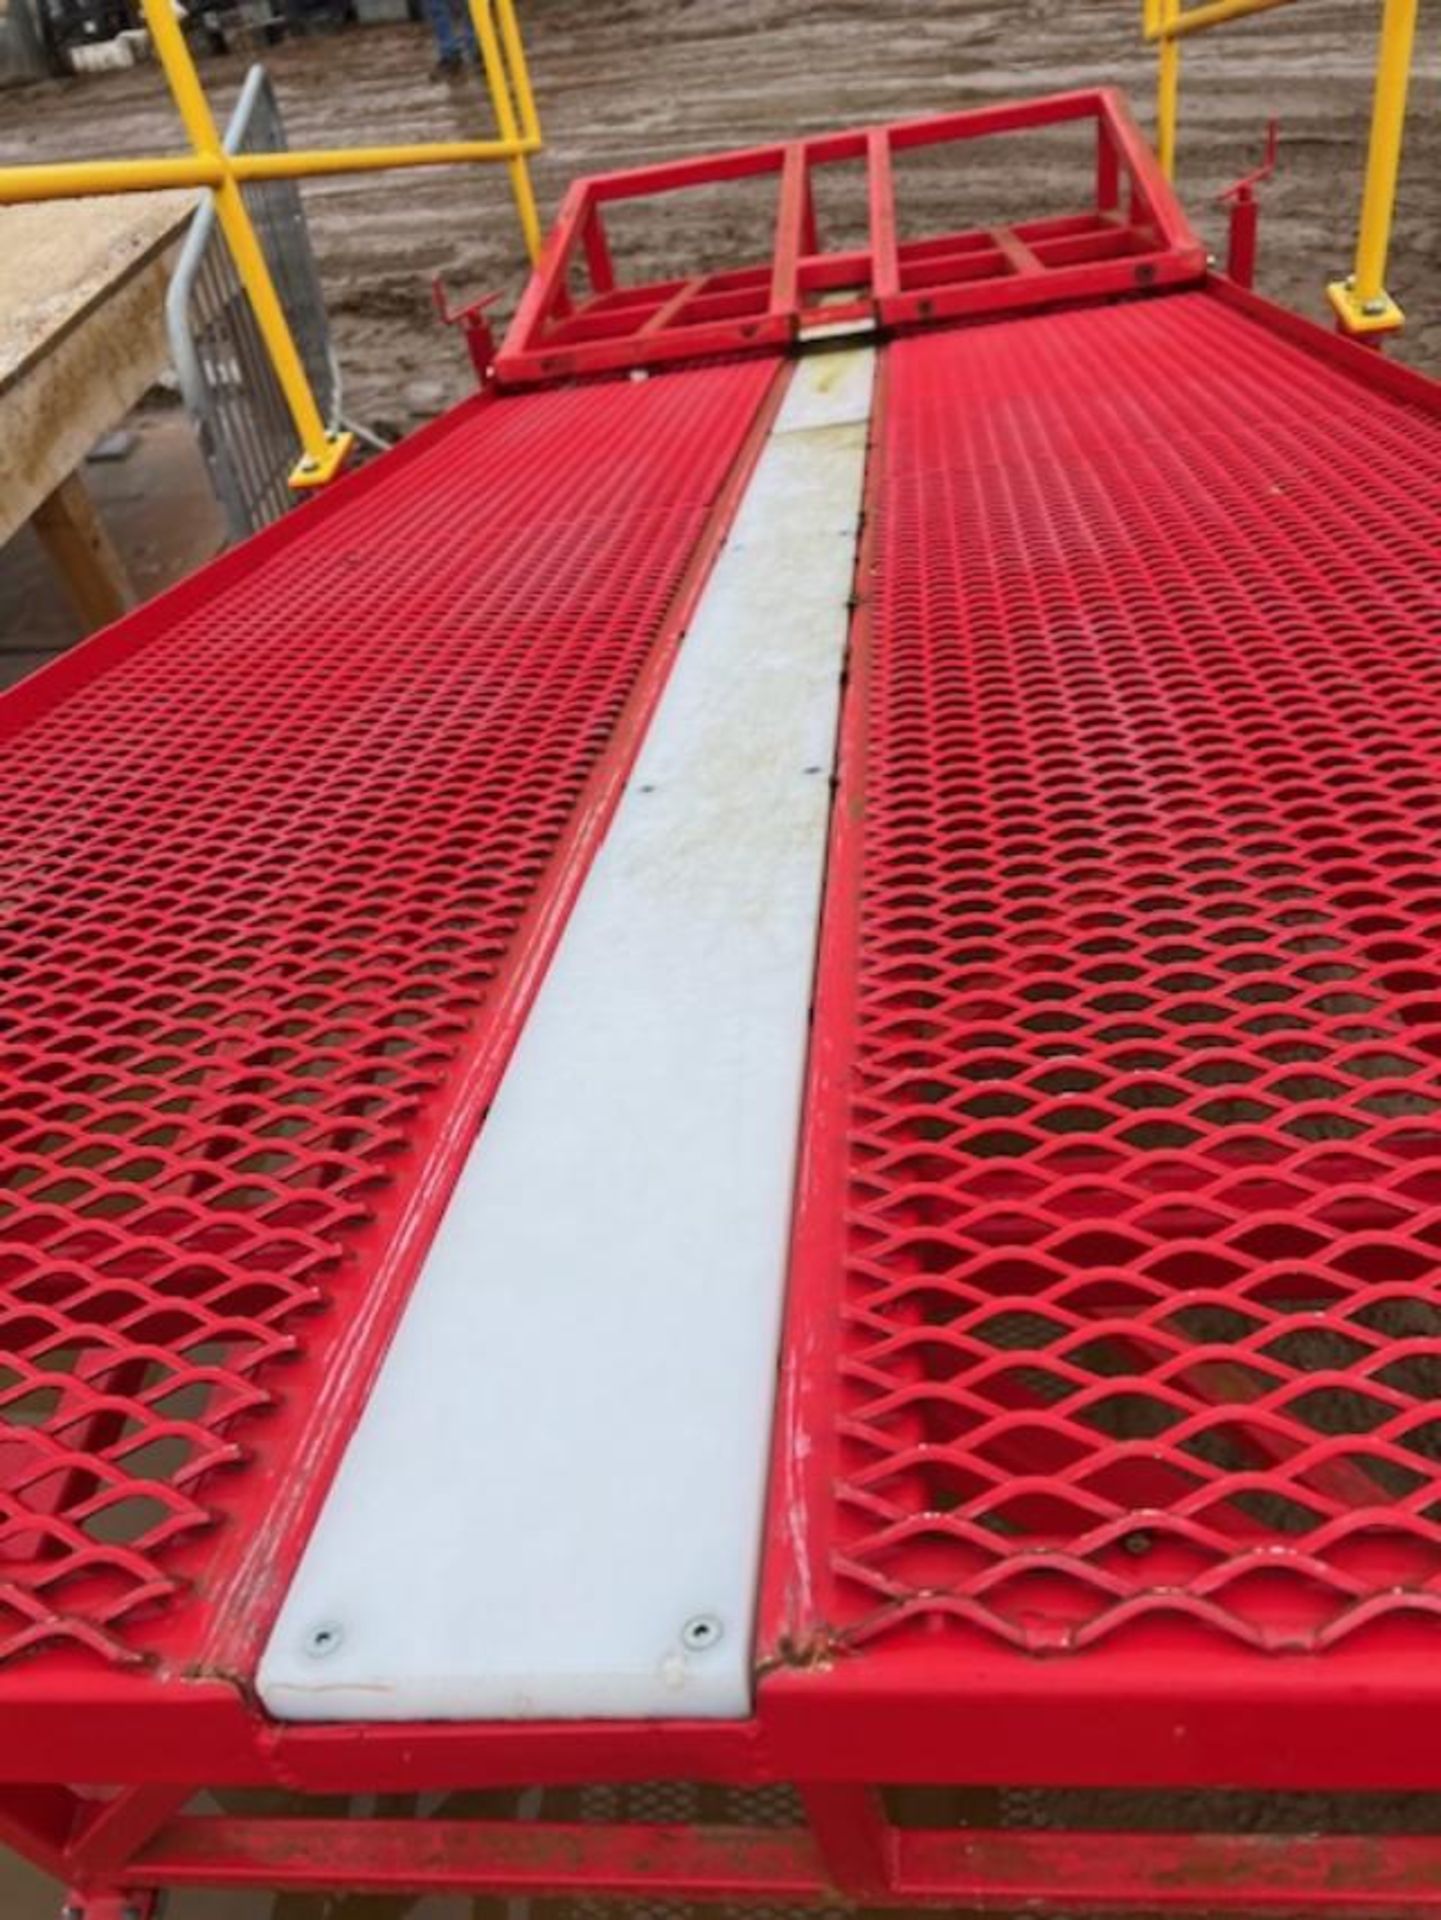 Wheeled Loading Ramp to suit forklift (brand new) - Image 4 of 8